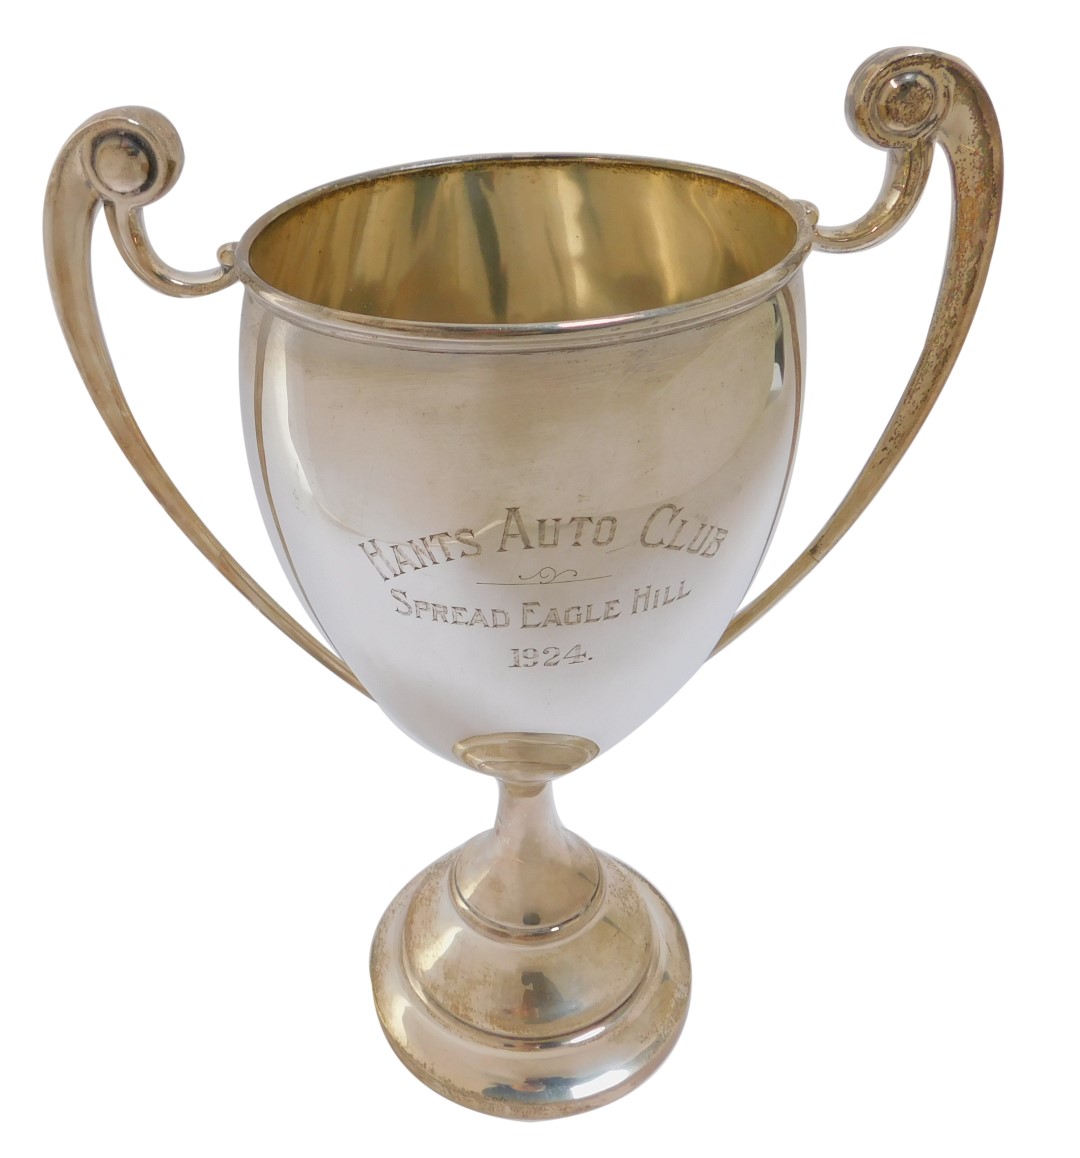 Motor Racing Interest. A George V silver two handled trophy awarded to Raymond Mays, the circular ta